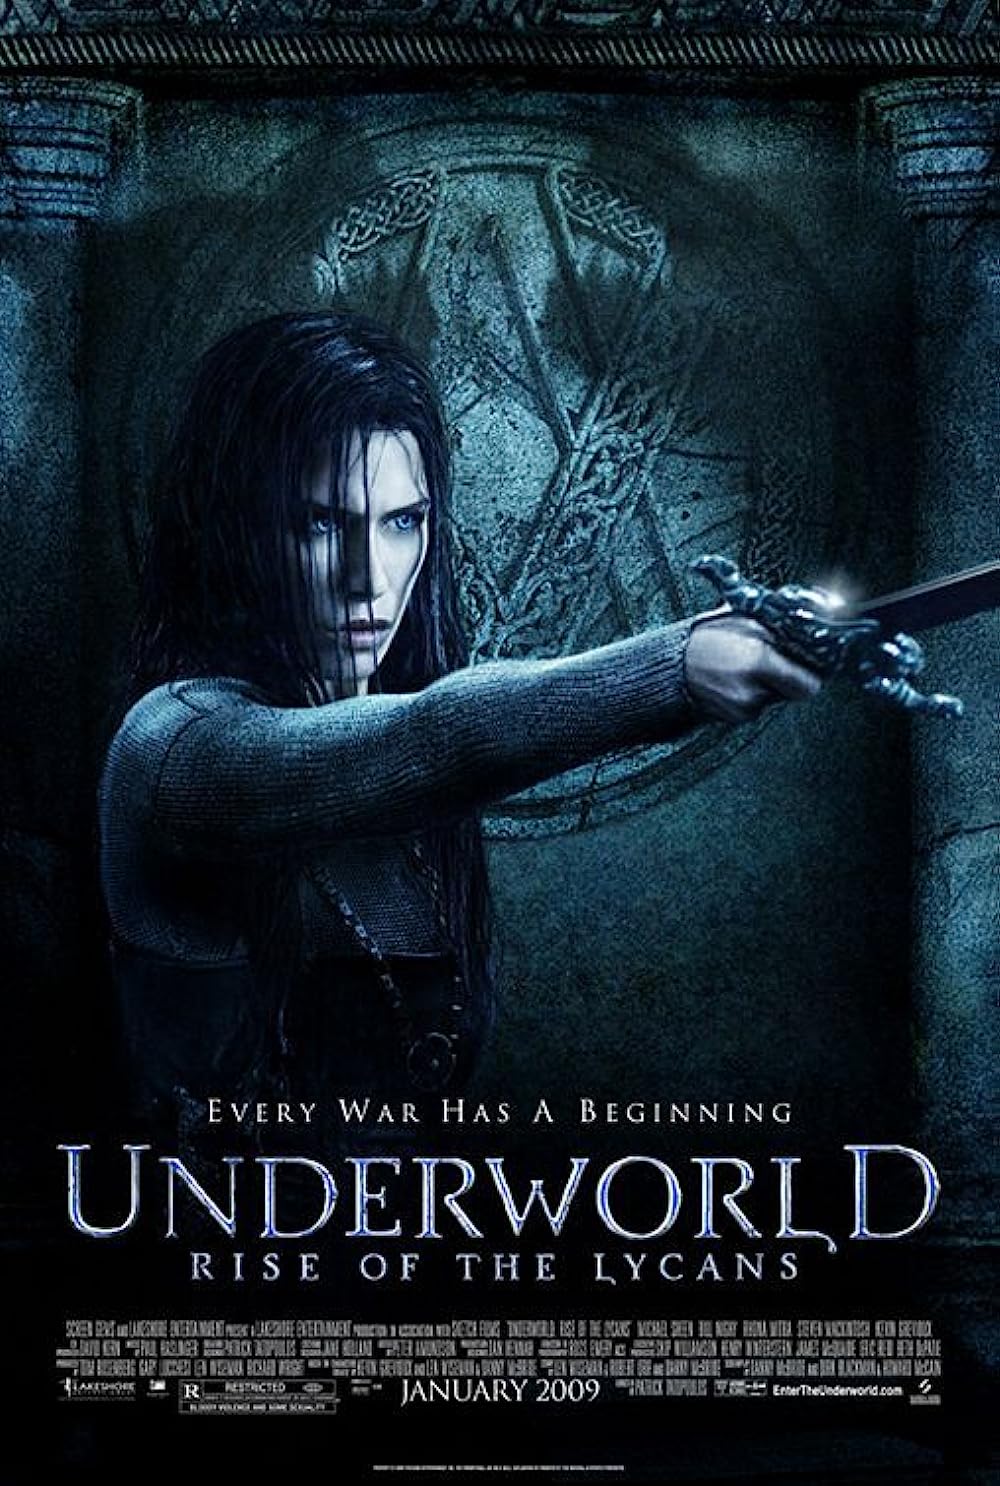 FULL MOVIE: Underworld: Rise Of The Lycans (2009) [Action]